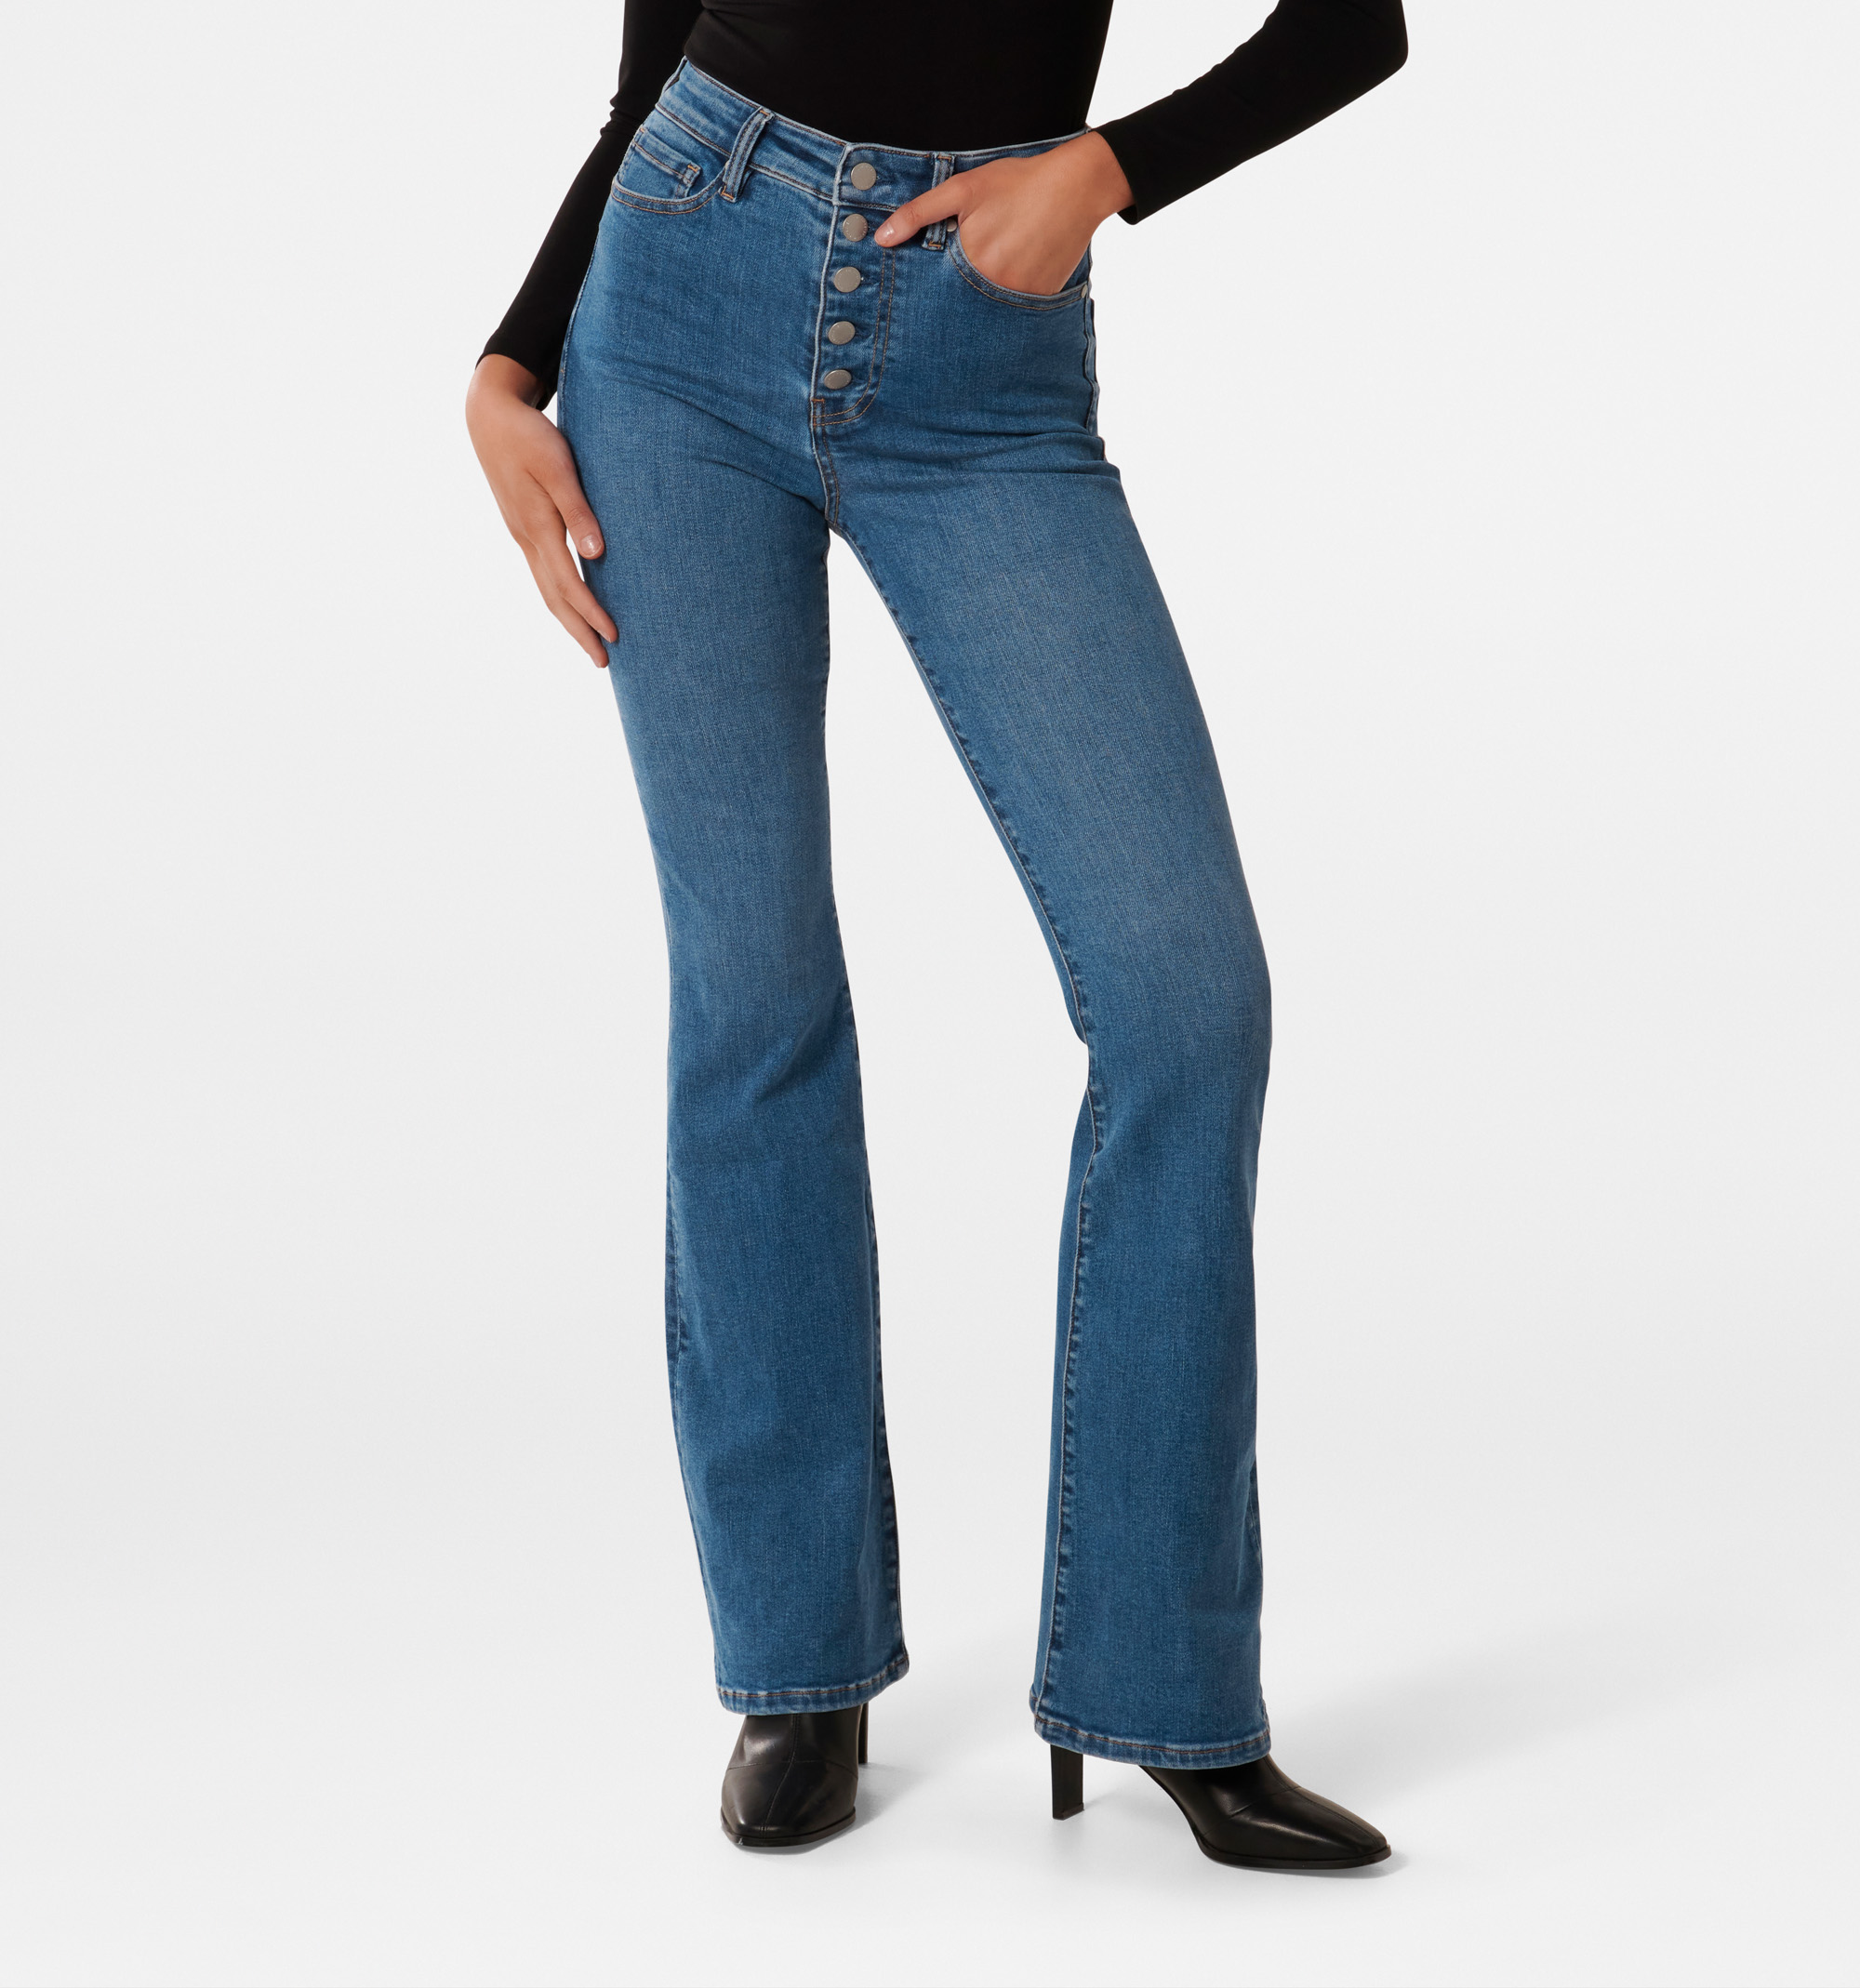 Buy Women Black Front Button Bell Bottom Jeans Online At Best Price 